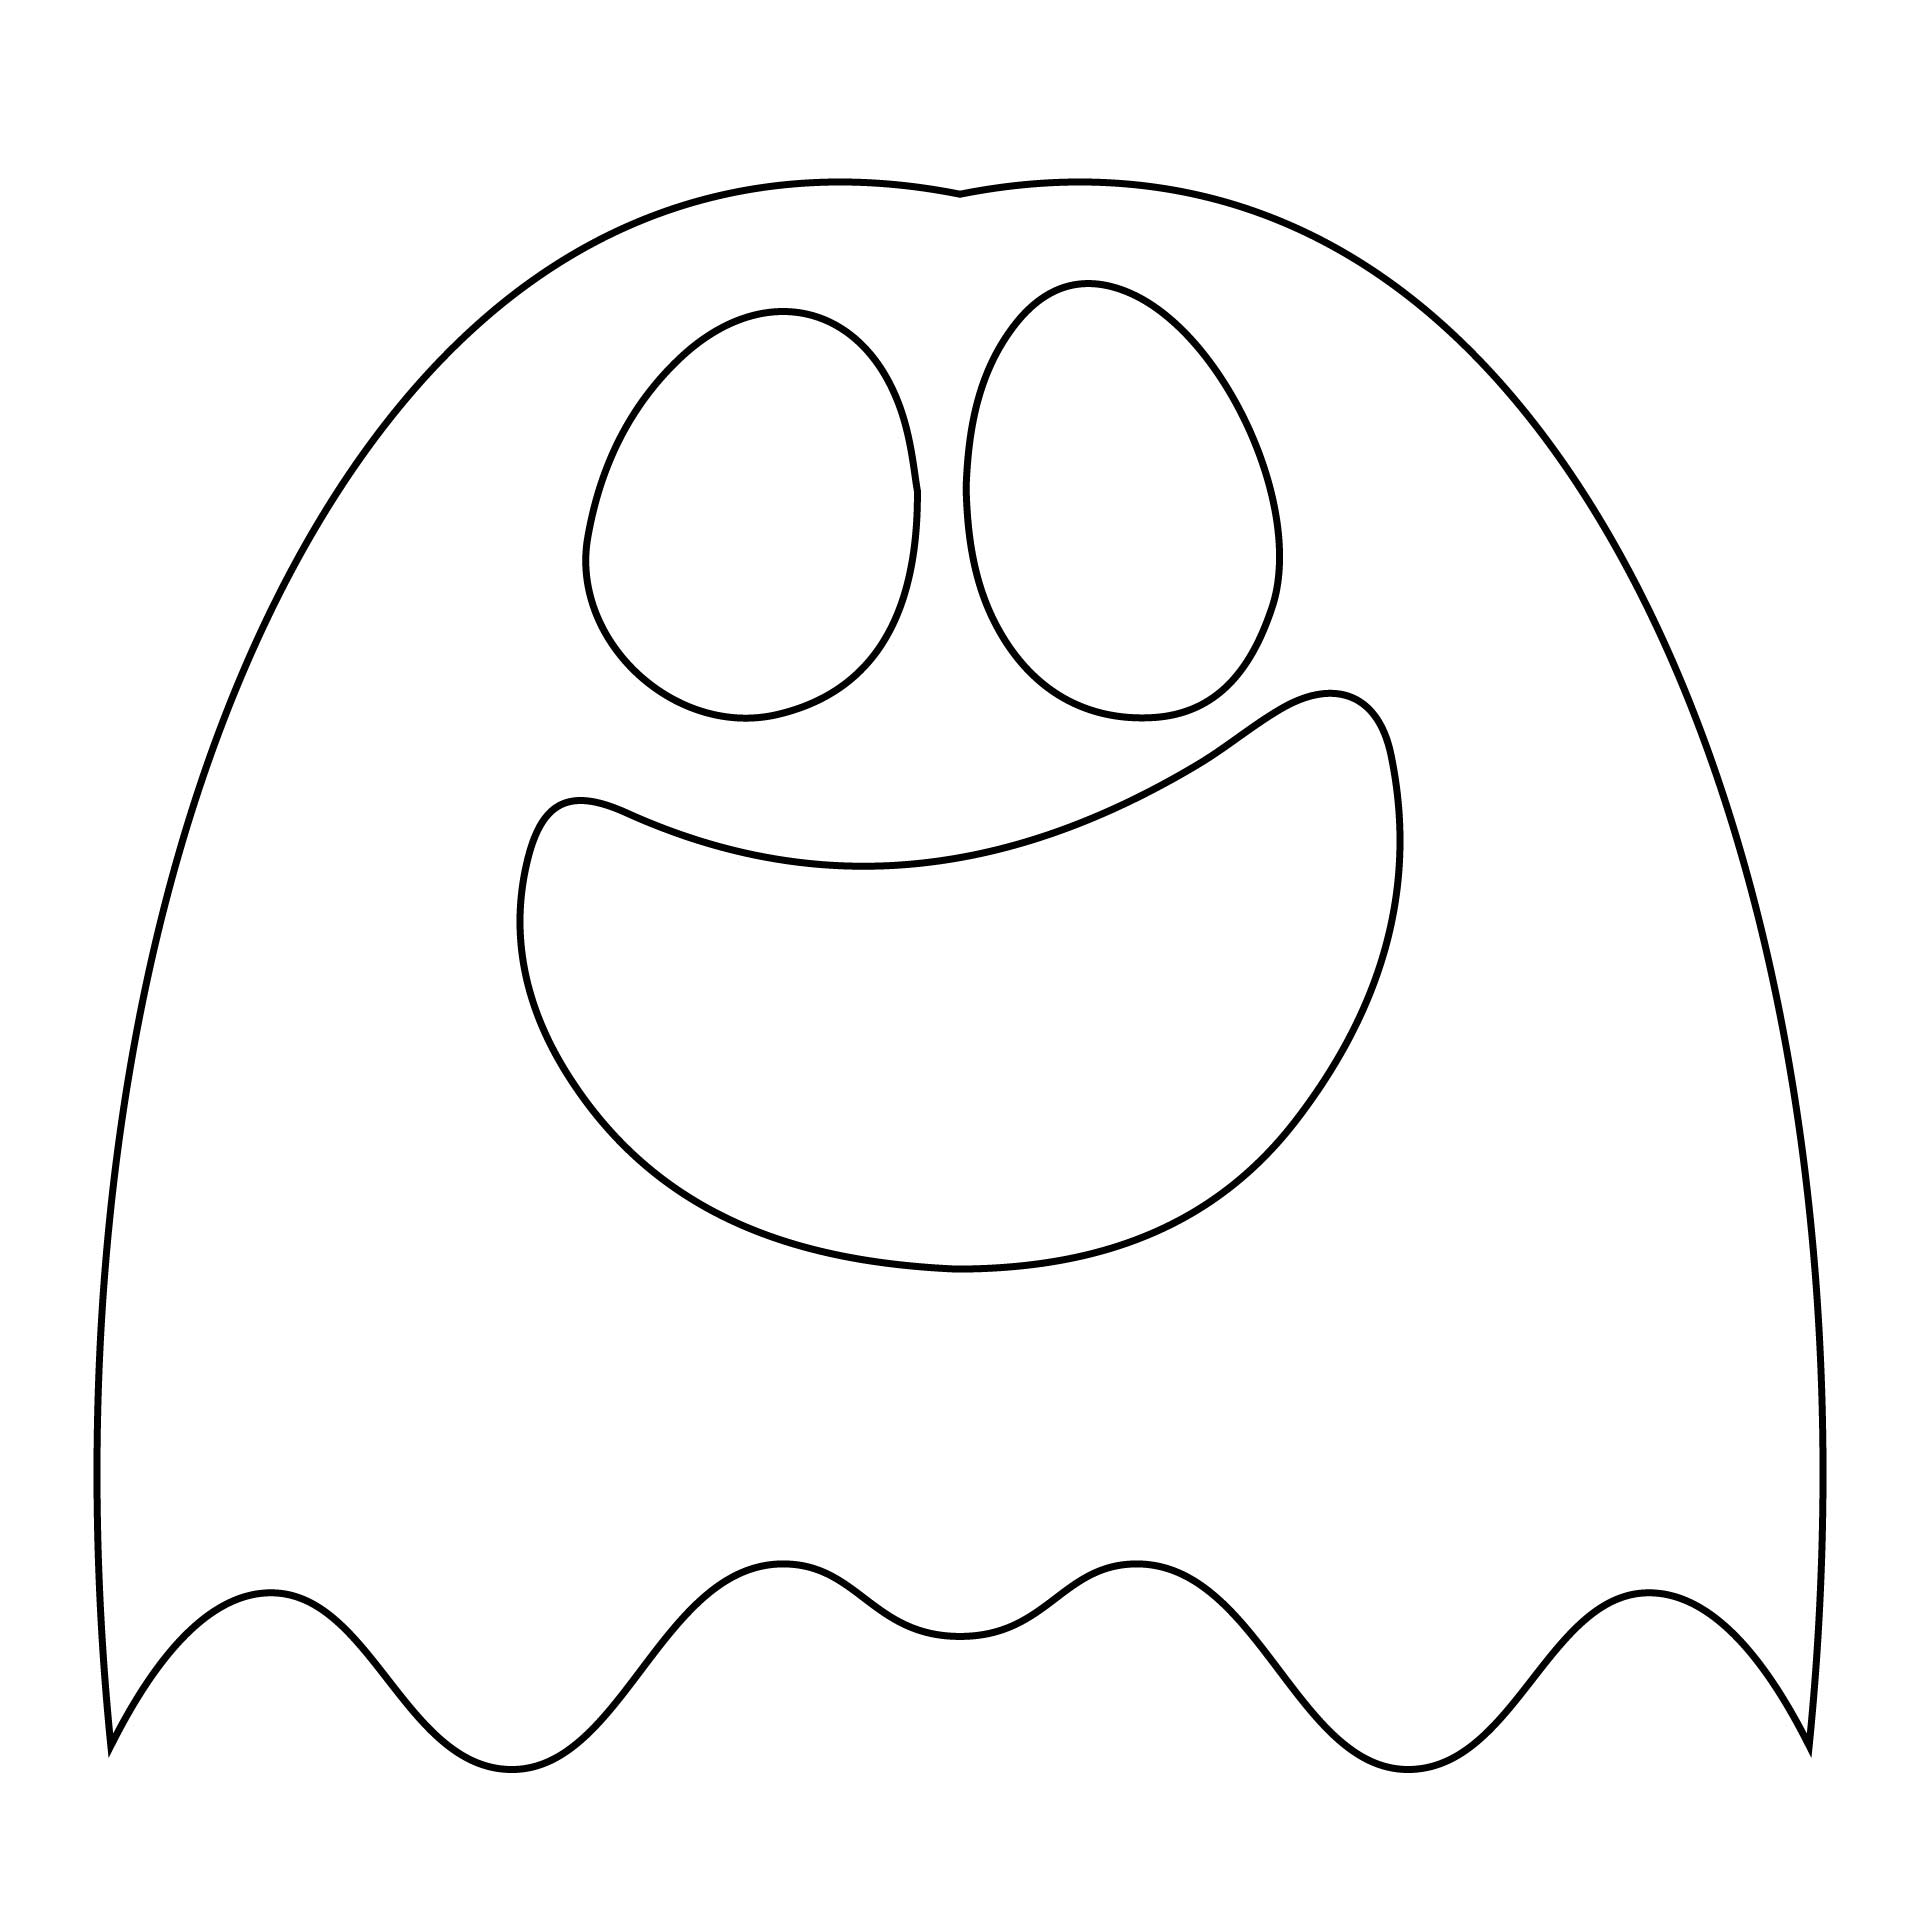 15 Best Halloween Mask Printable Coloring Pages PDF for Free at Printablee